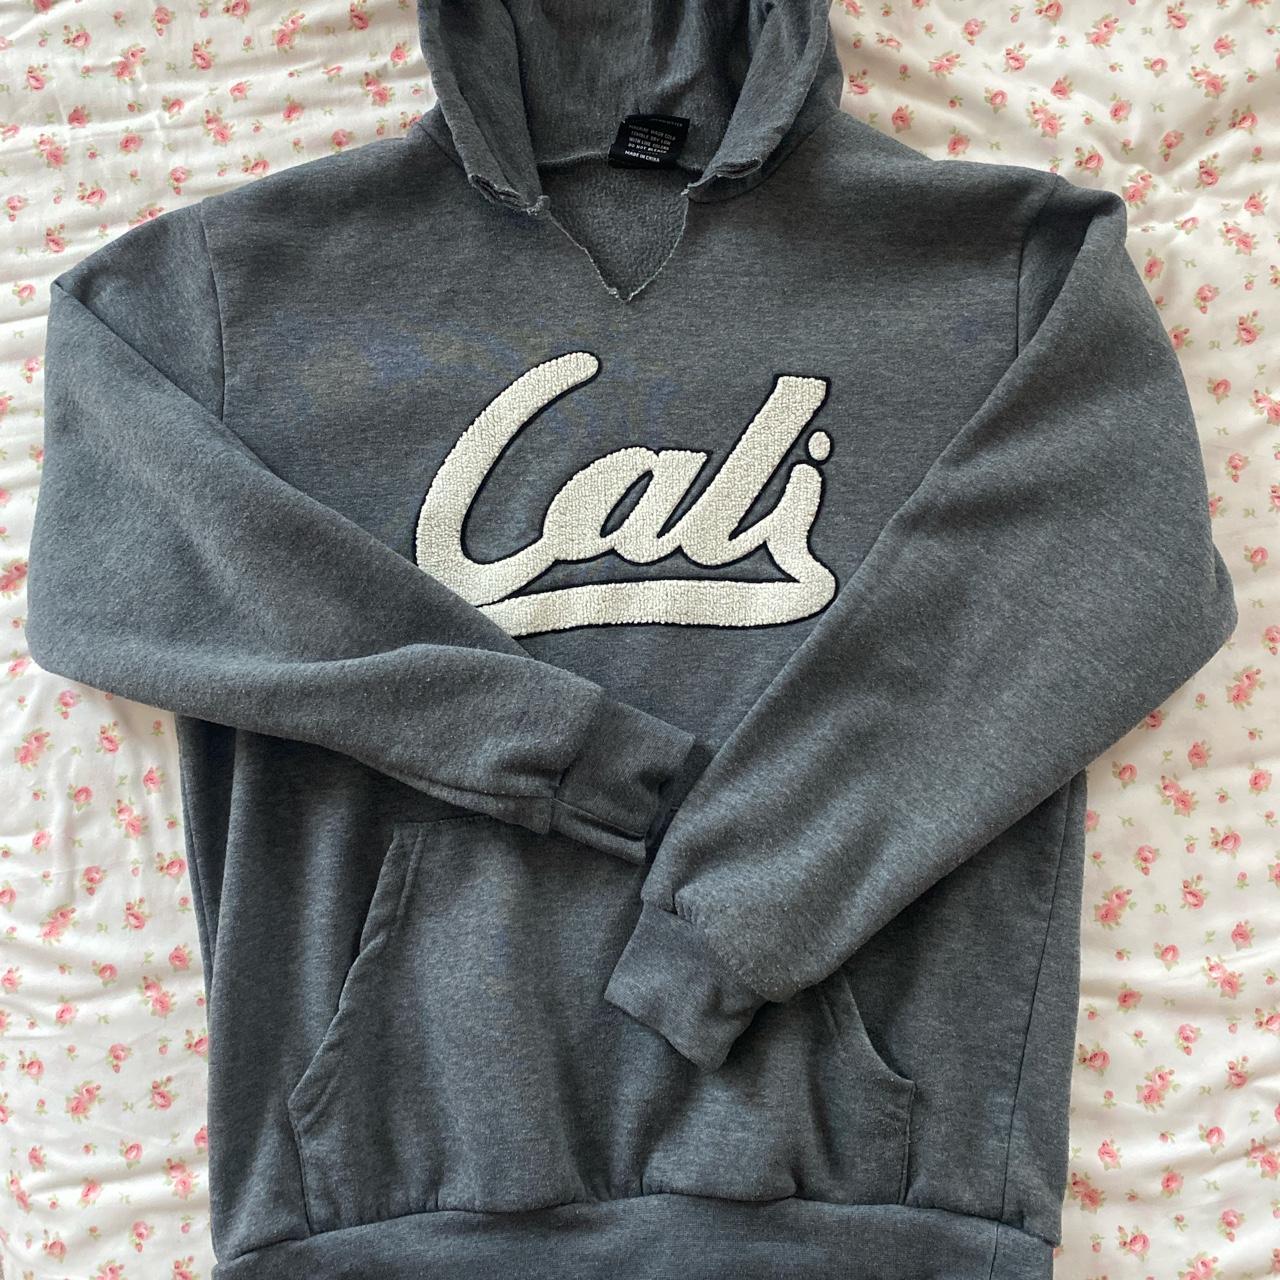 Original deluxe supple cali embroidered hoodie, Size